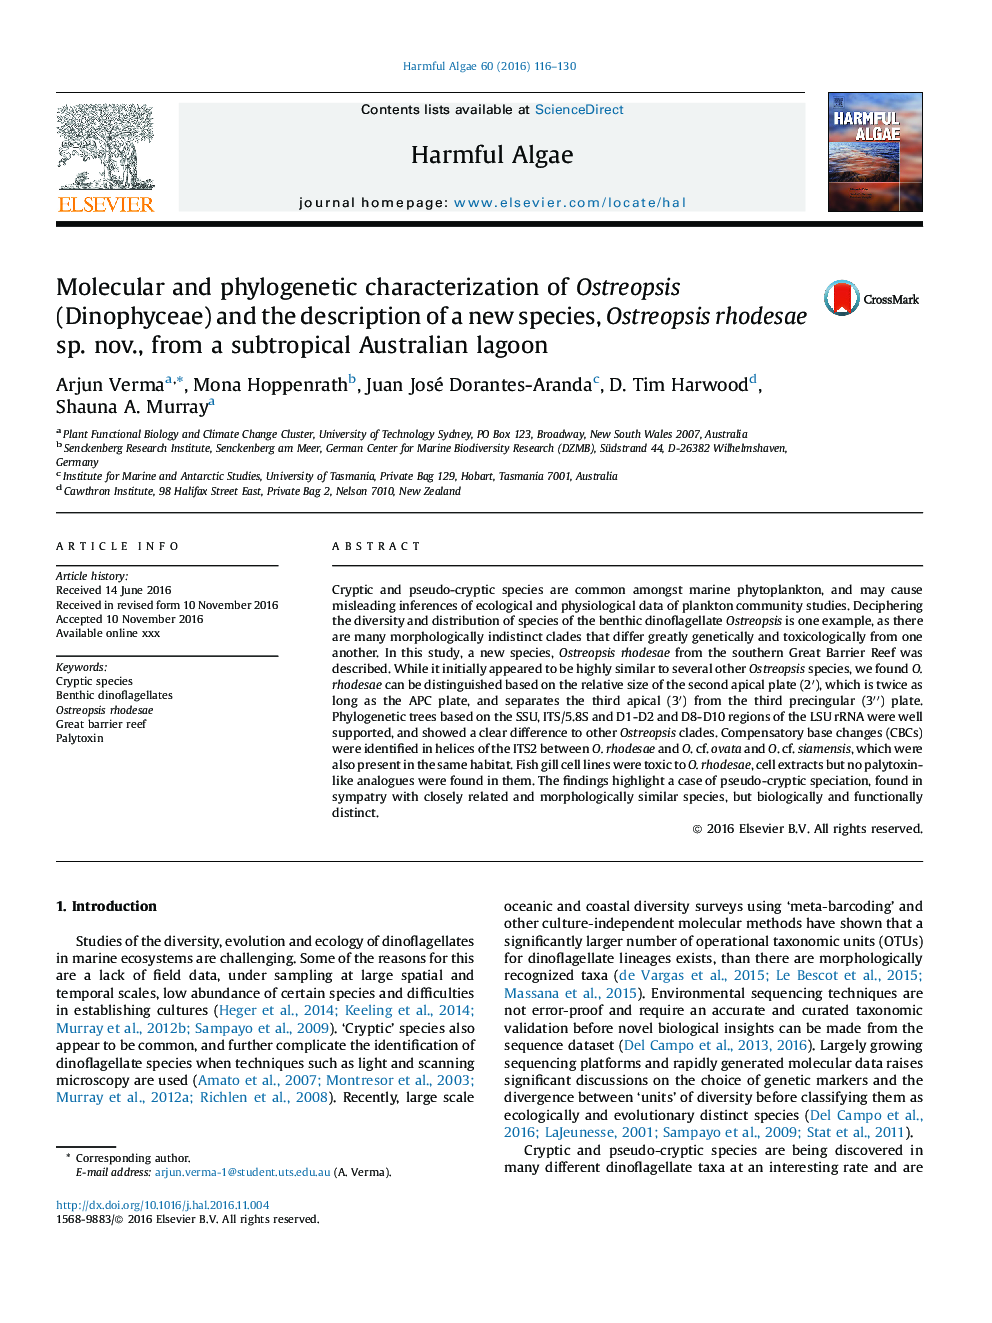 Molecular and phylogenetic characterization of Ostreopsis (Dinophyceae) and the description of a new species, Ostreopsis rhodesae sp. nov., from a subtropical Australian lagoon